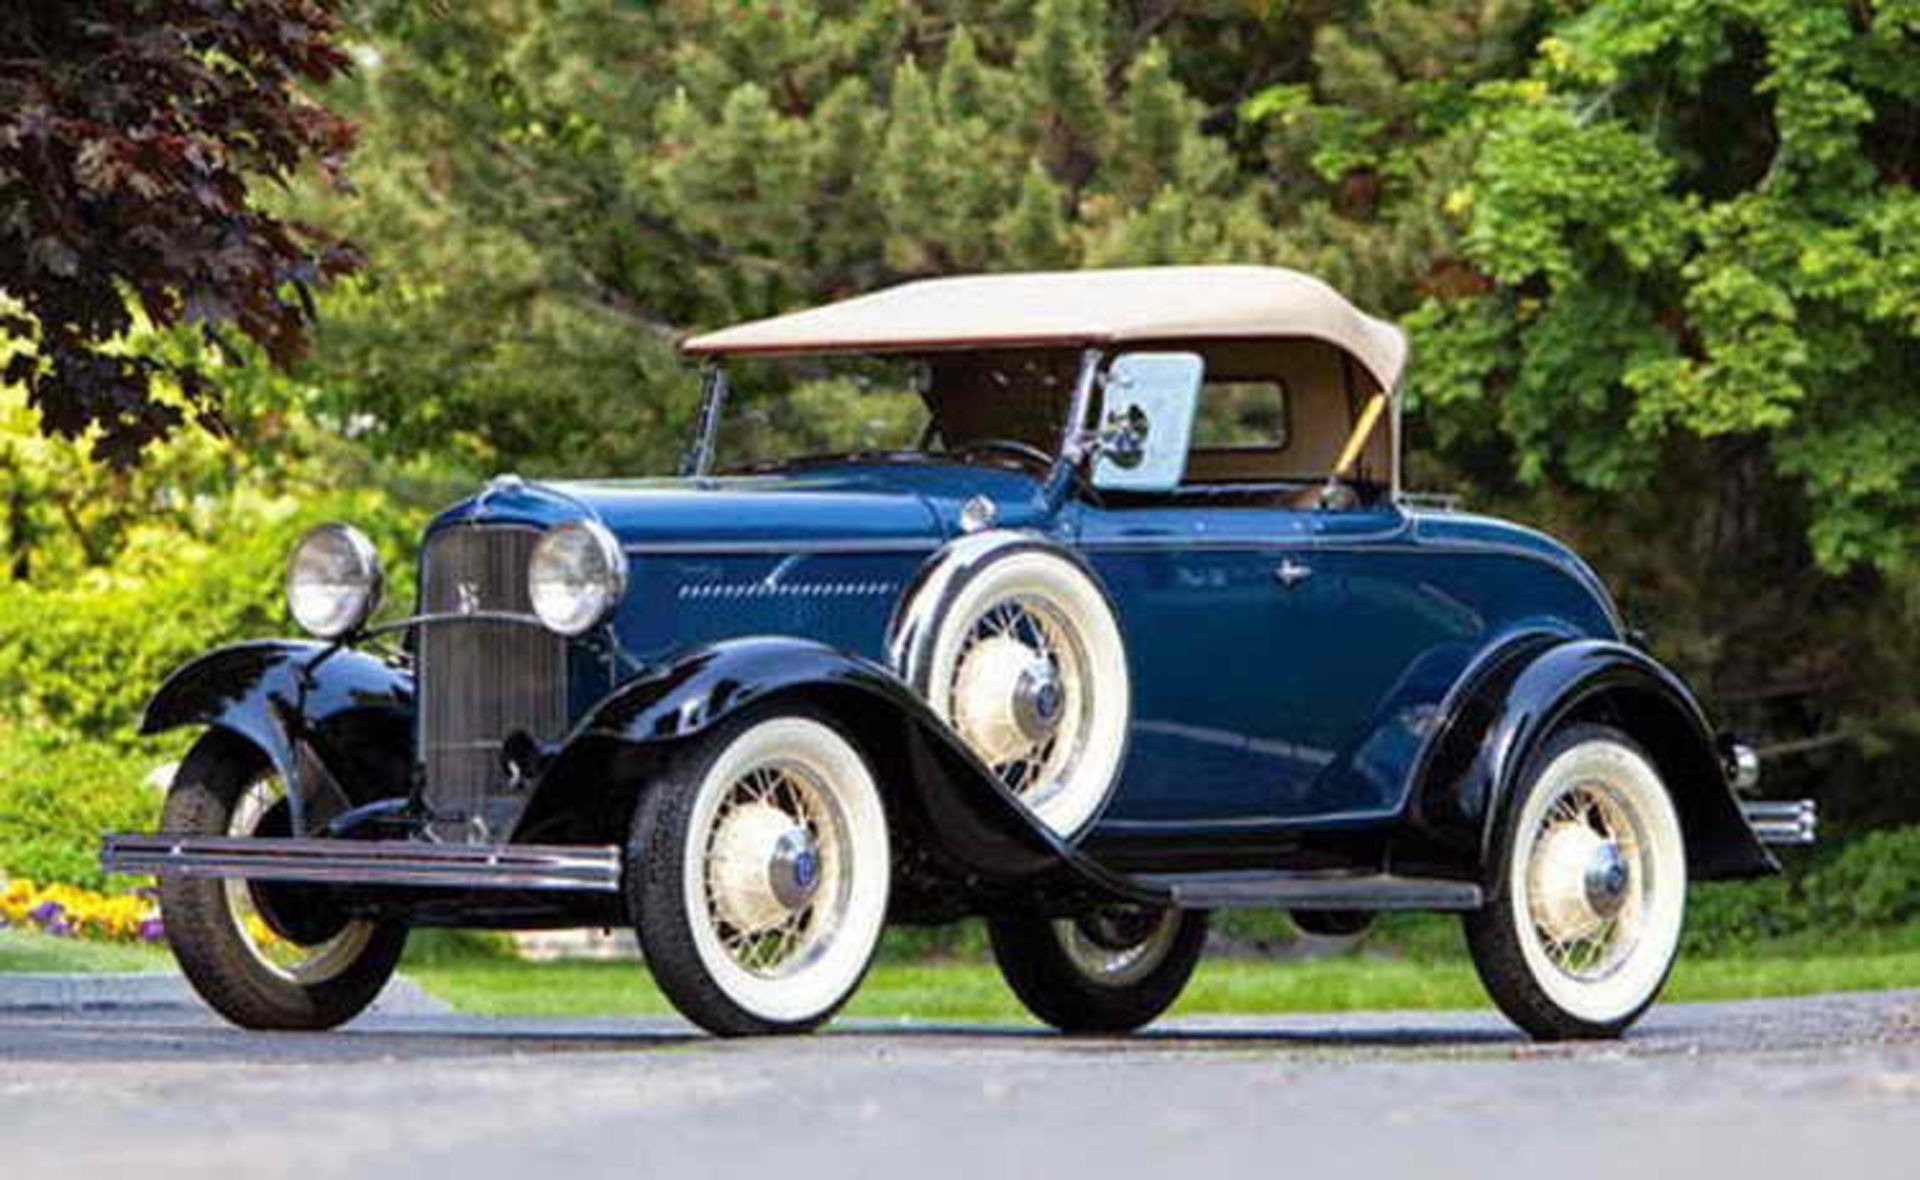 model A ford